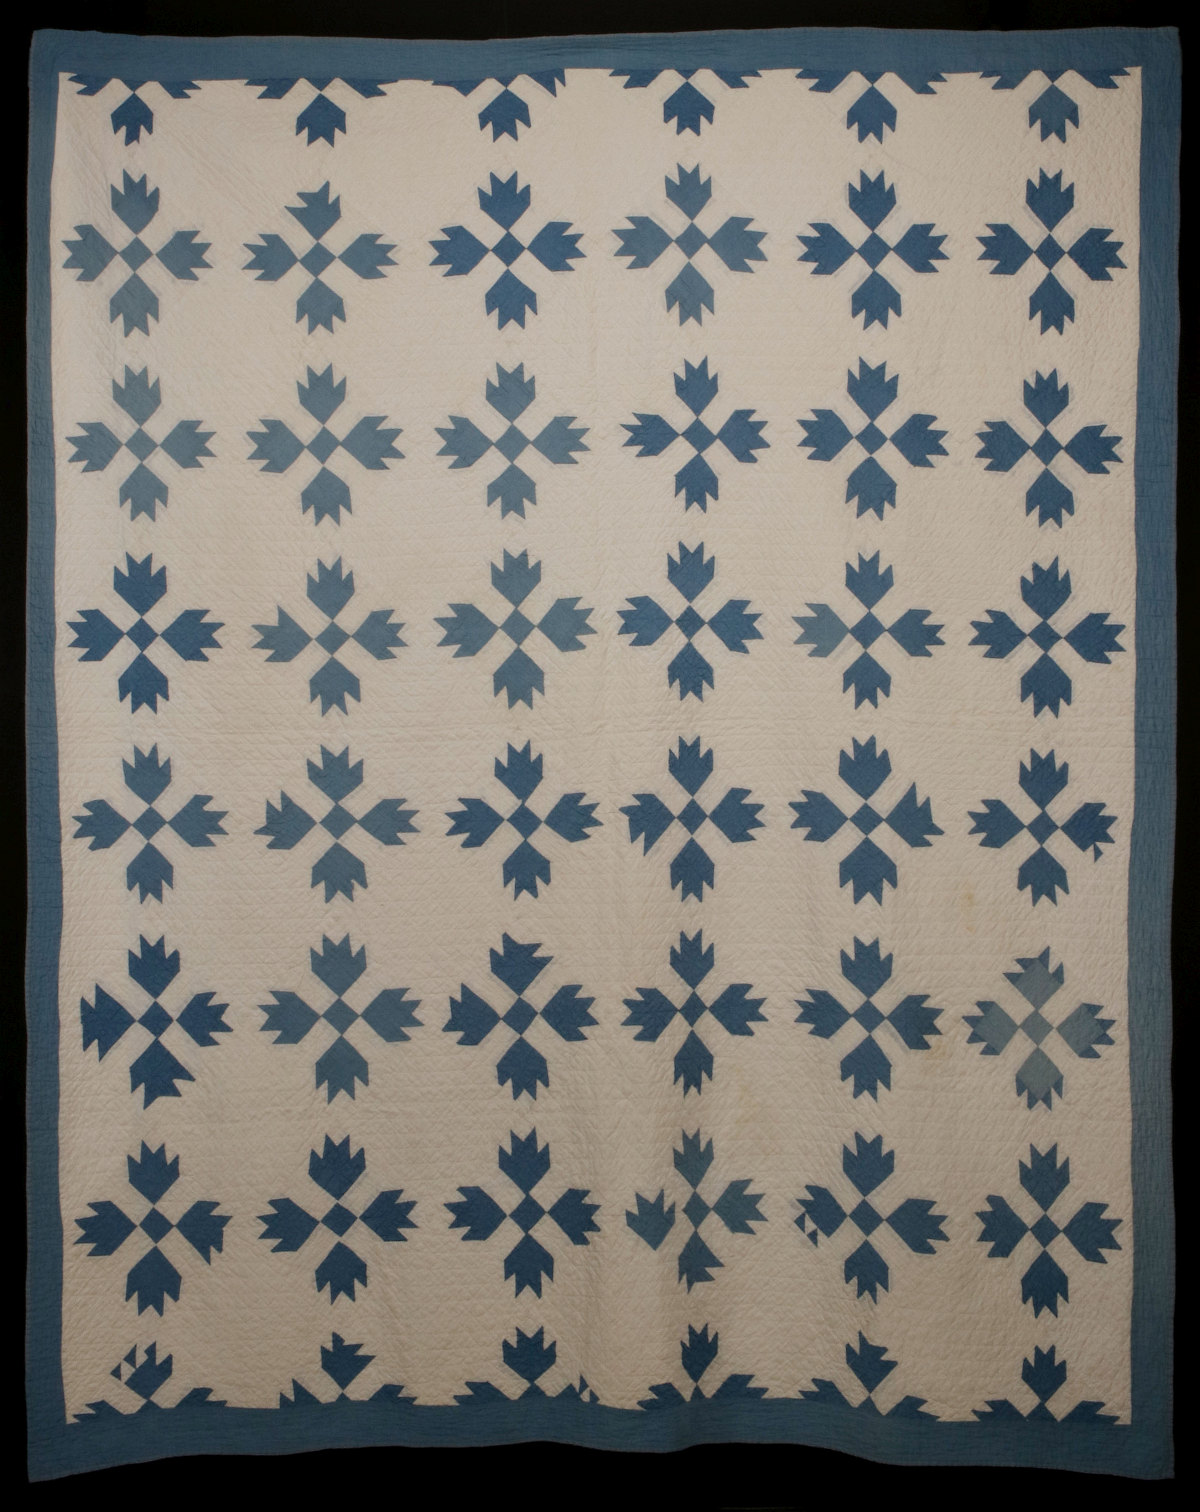 AN EARLY 20TH C BLUE AND WHITE BEAR'S PAW PATTERN QUILT